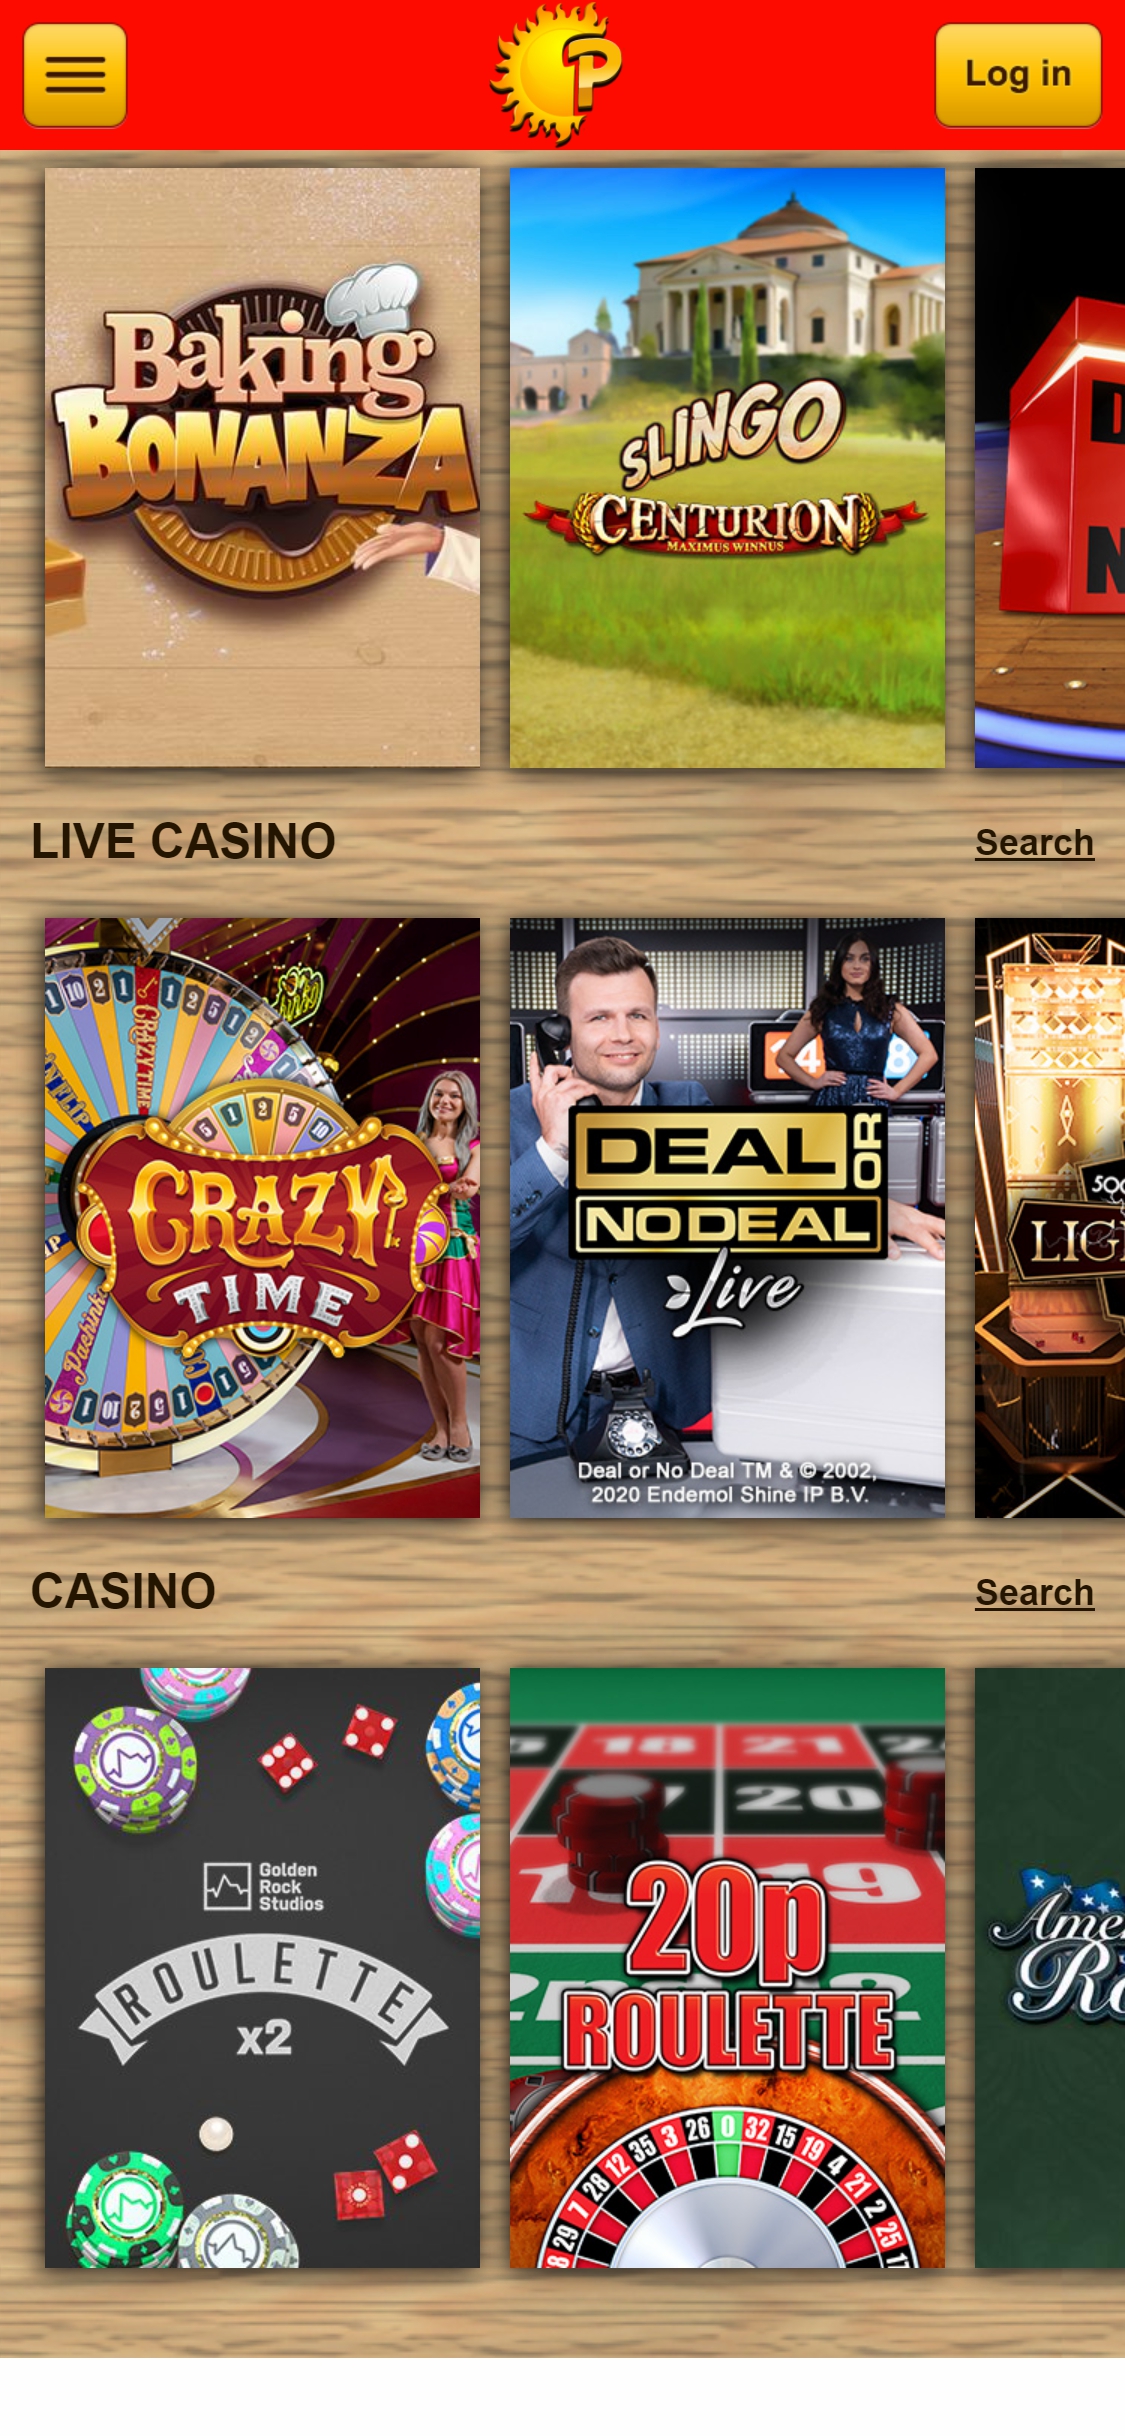 PlaySunny UK Casino Mobile Games Review